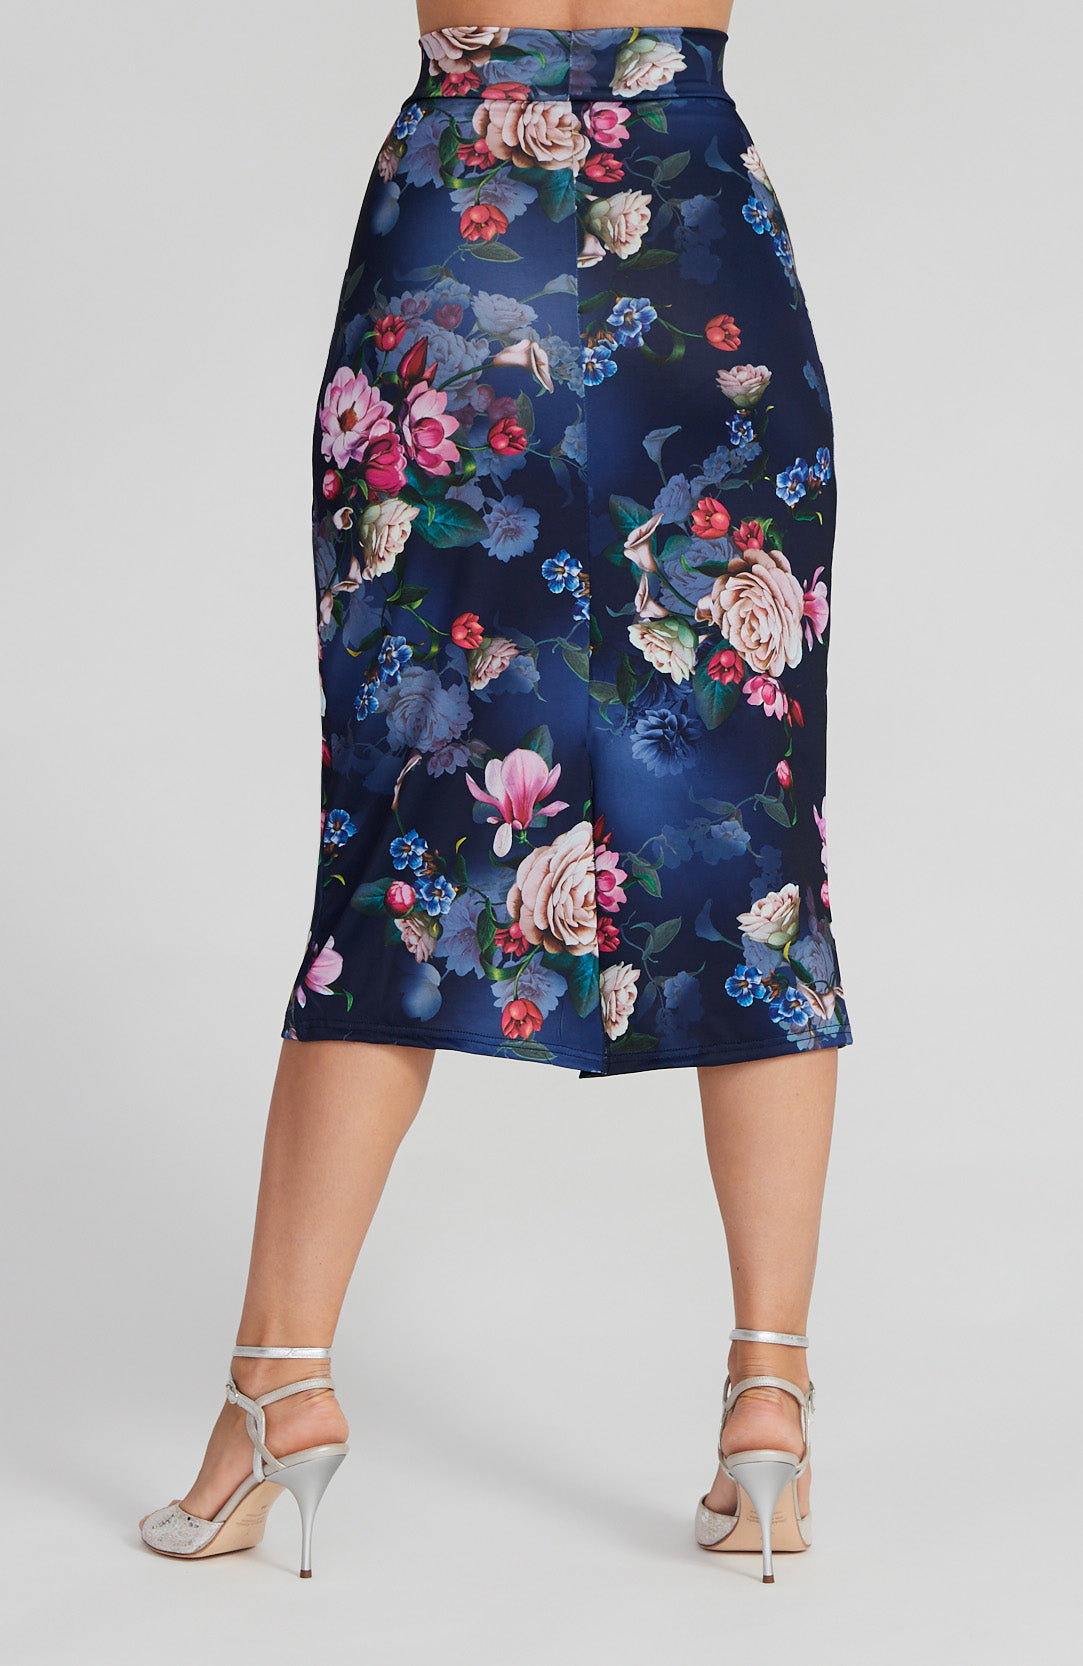 blossom argentine tango skirt by Coleccion Berlin